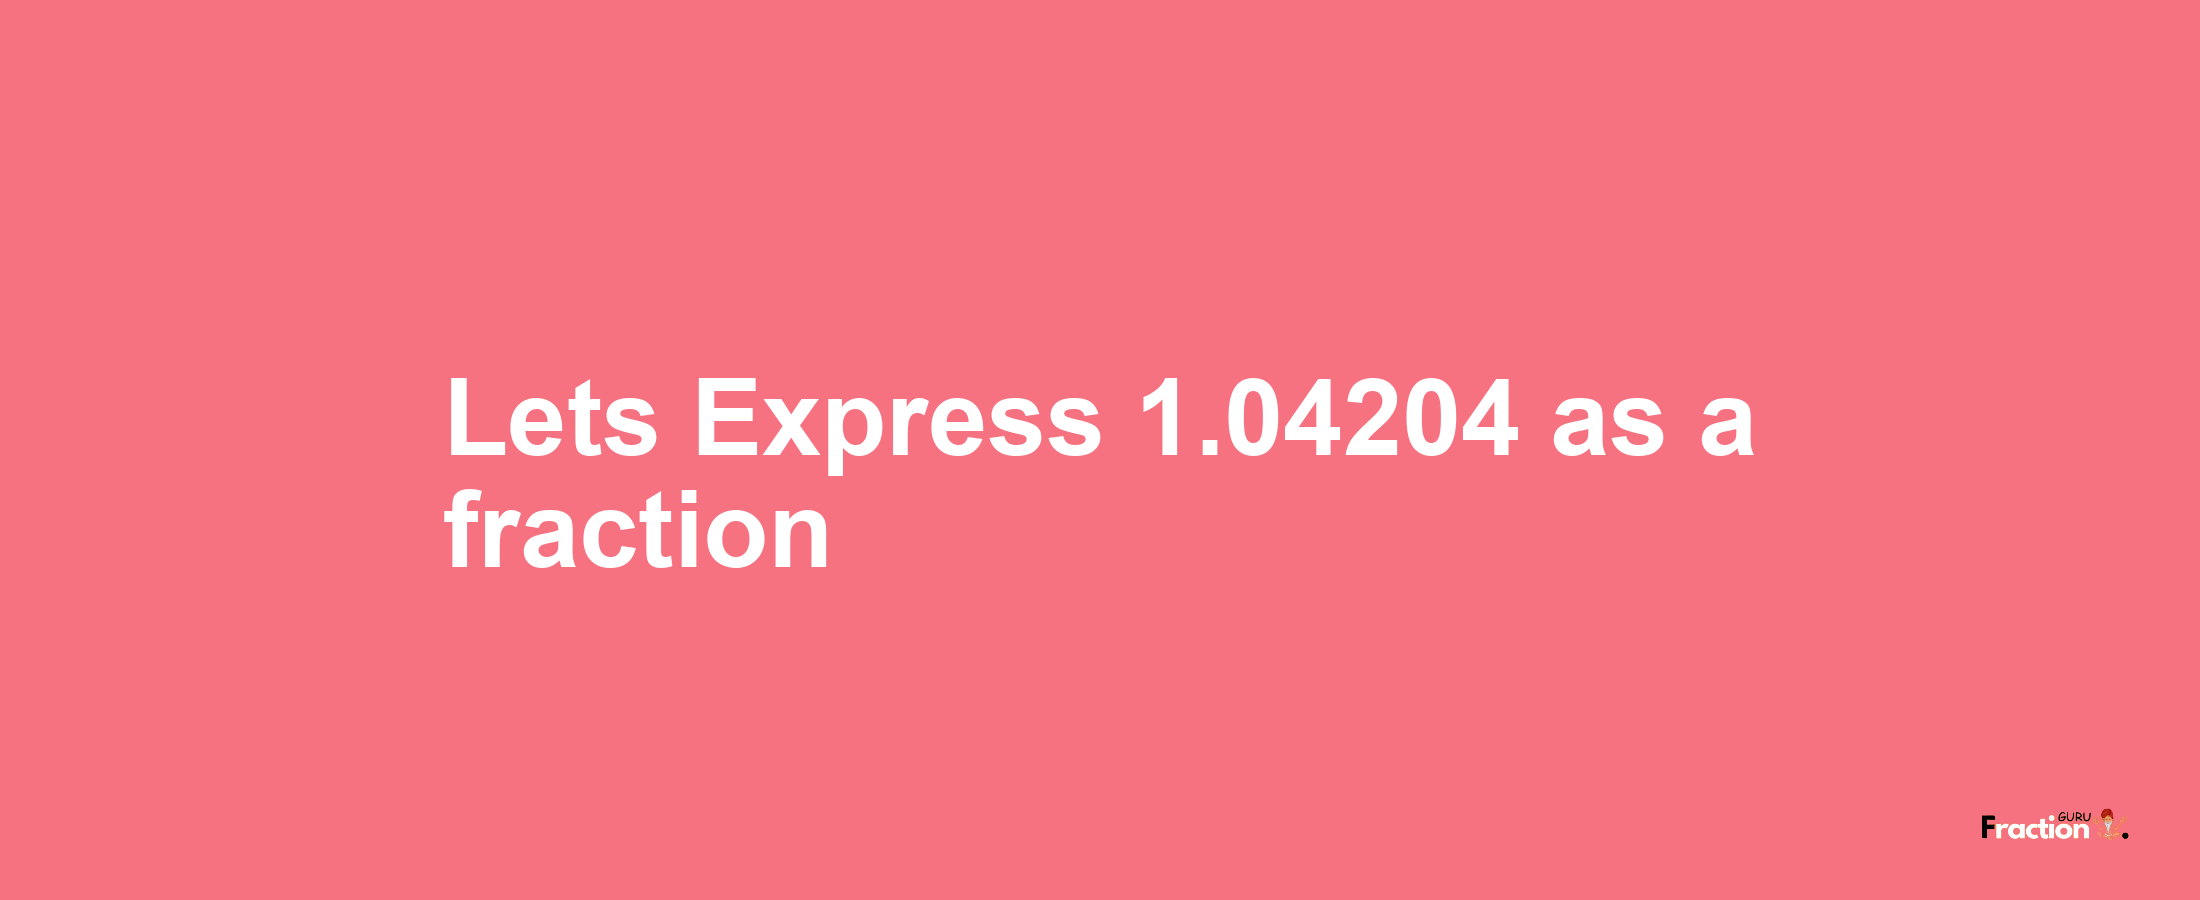 Lets Express 1.04204 as afraction